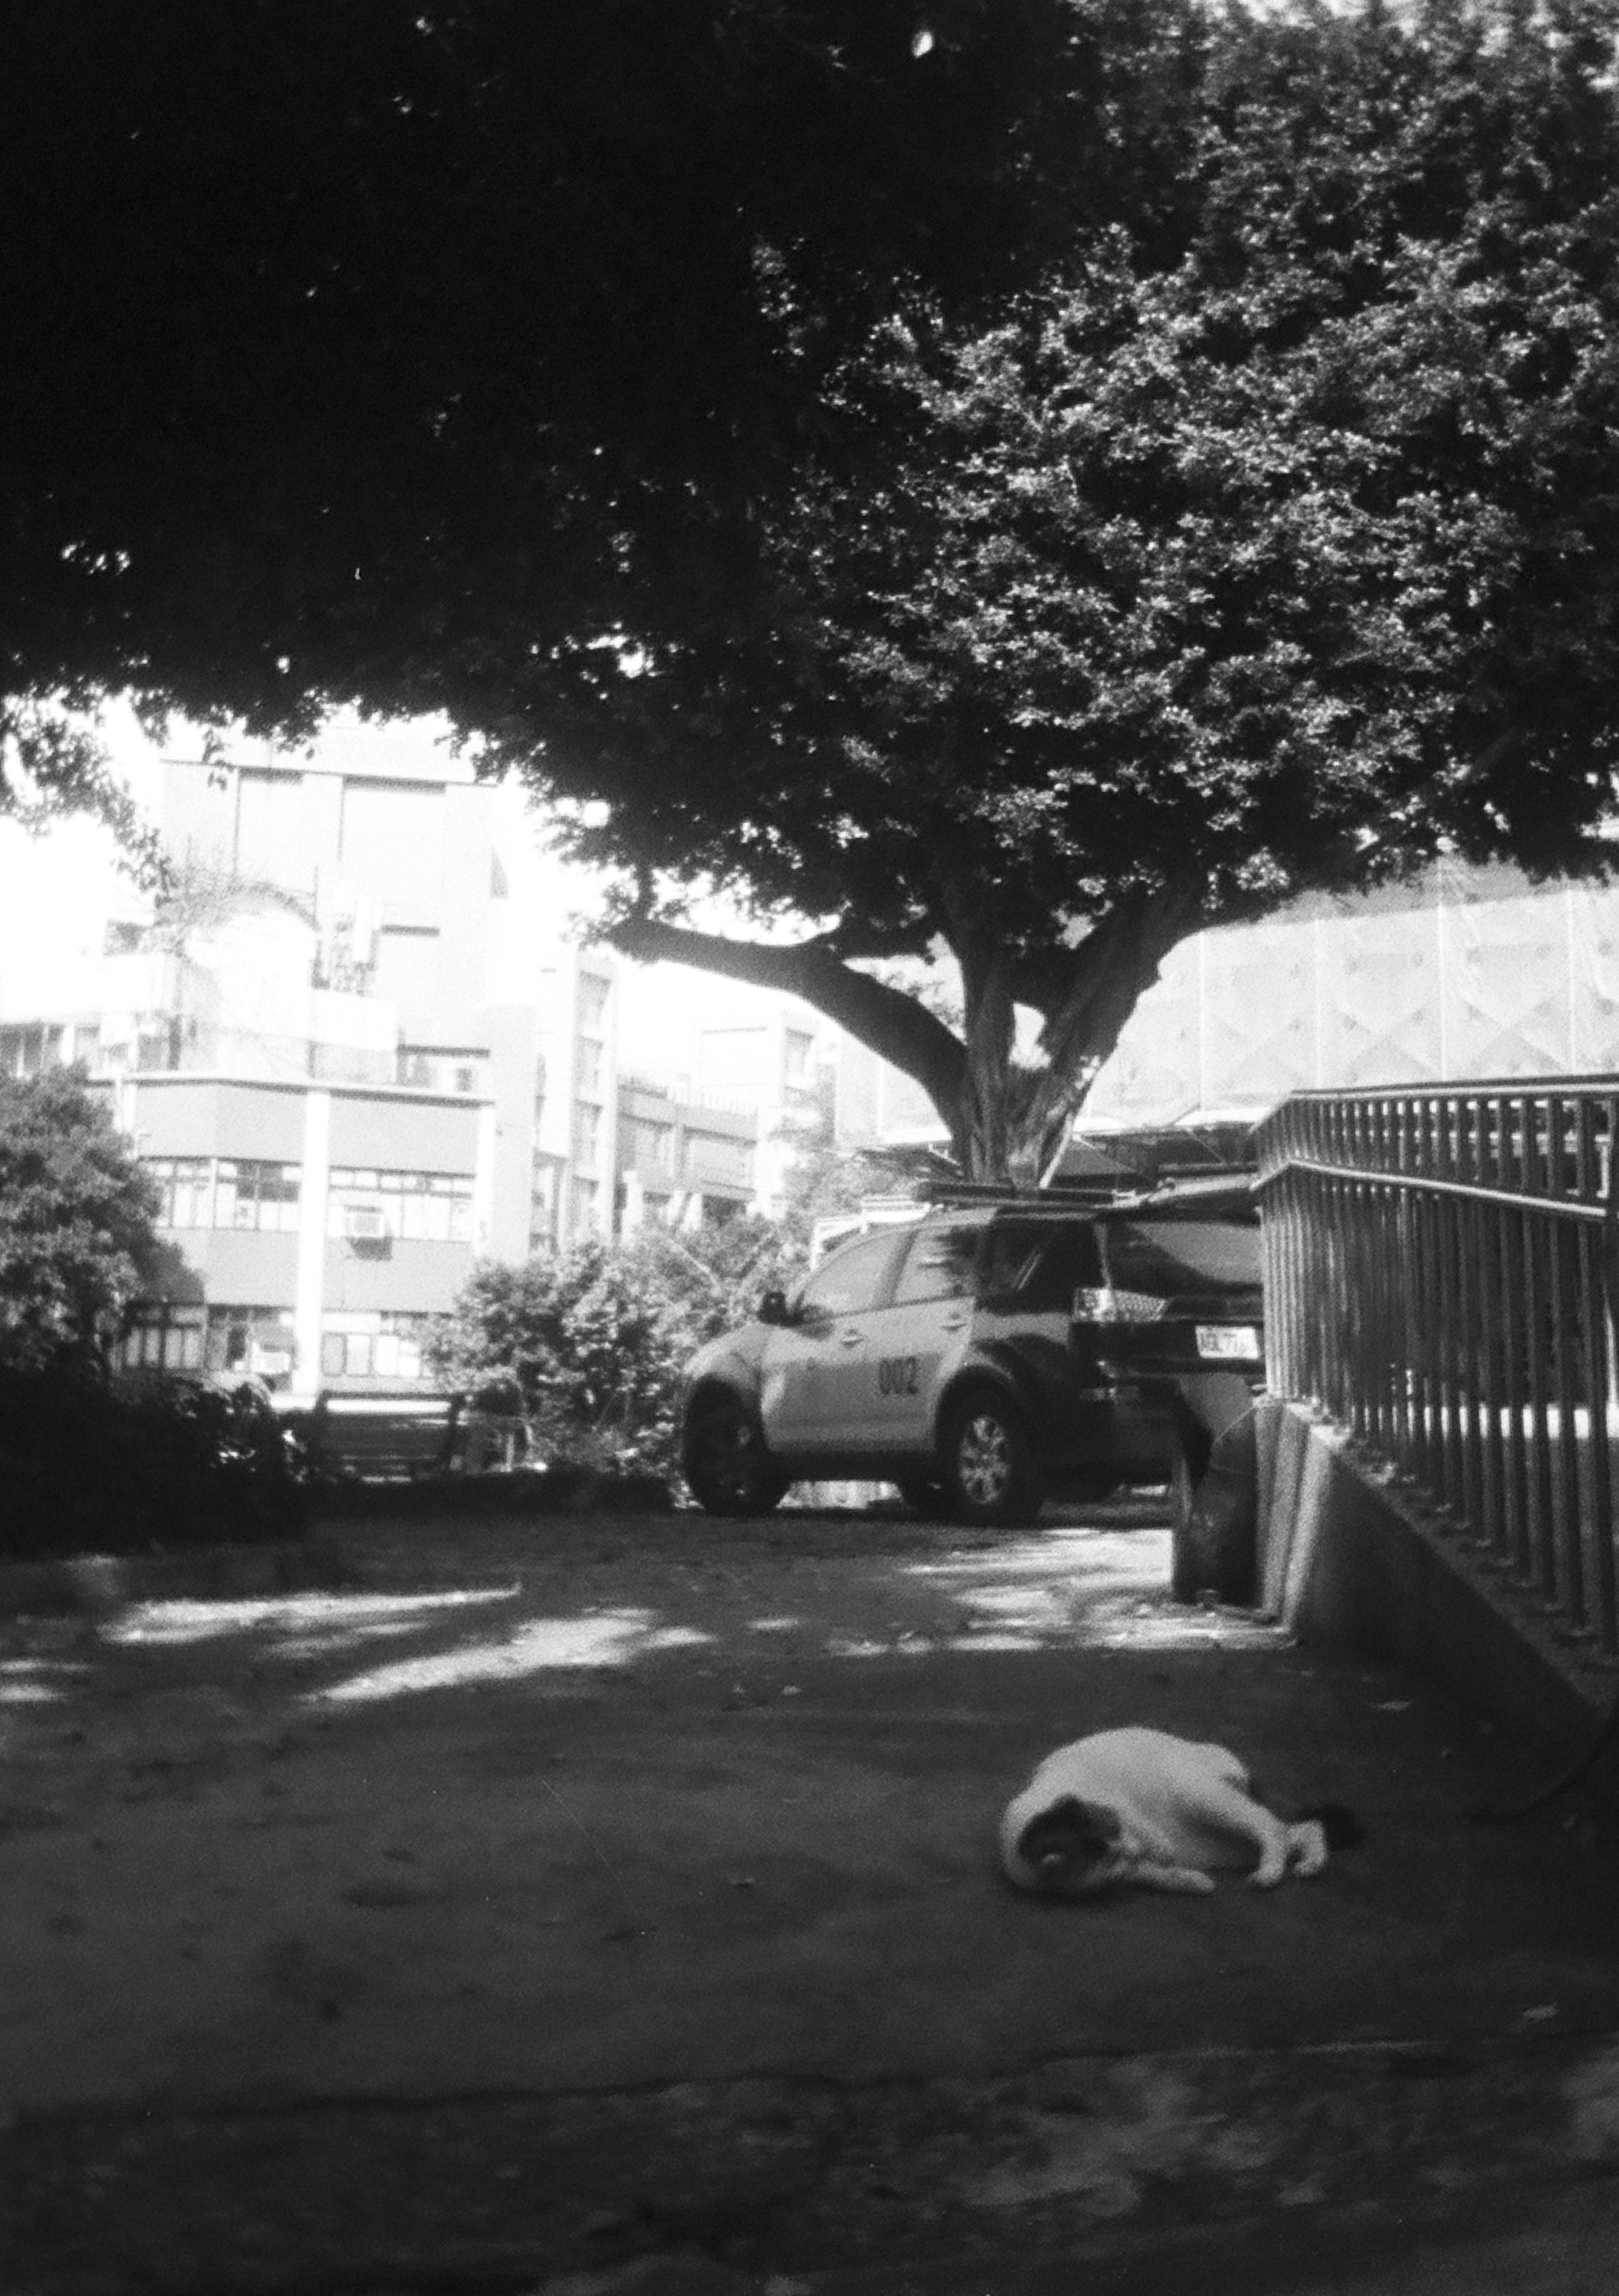 Cat sleeping on the ground outside on a sunny day under a tree.